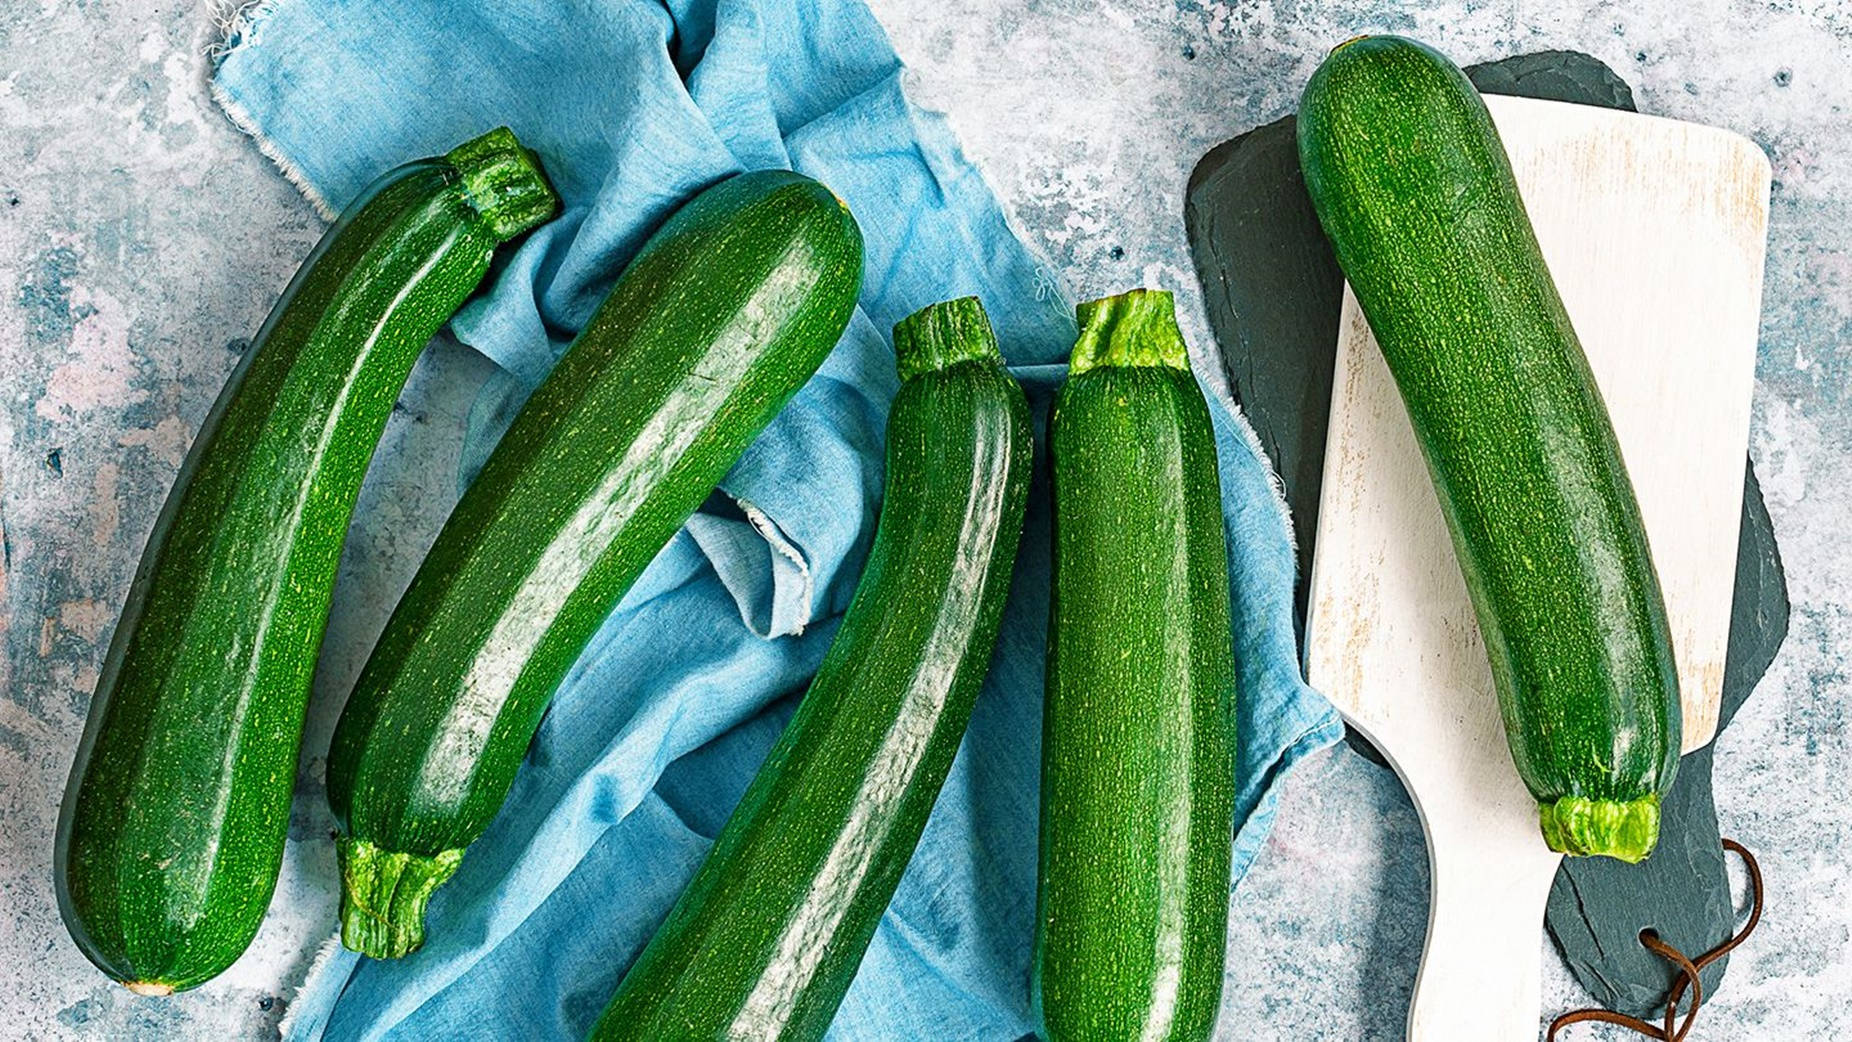 Zucchinis With Shiny Polished Green Bodies Wallpaper